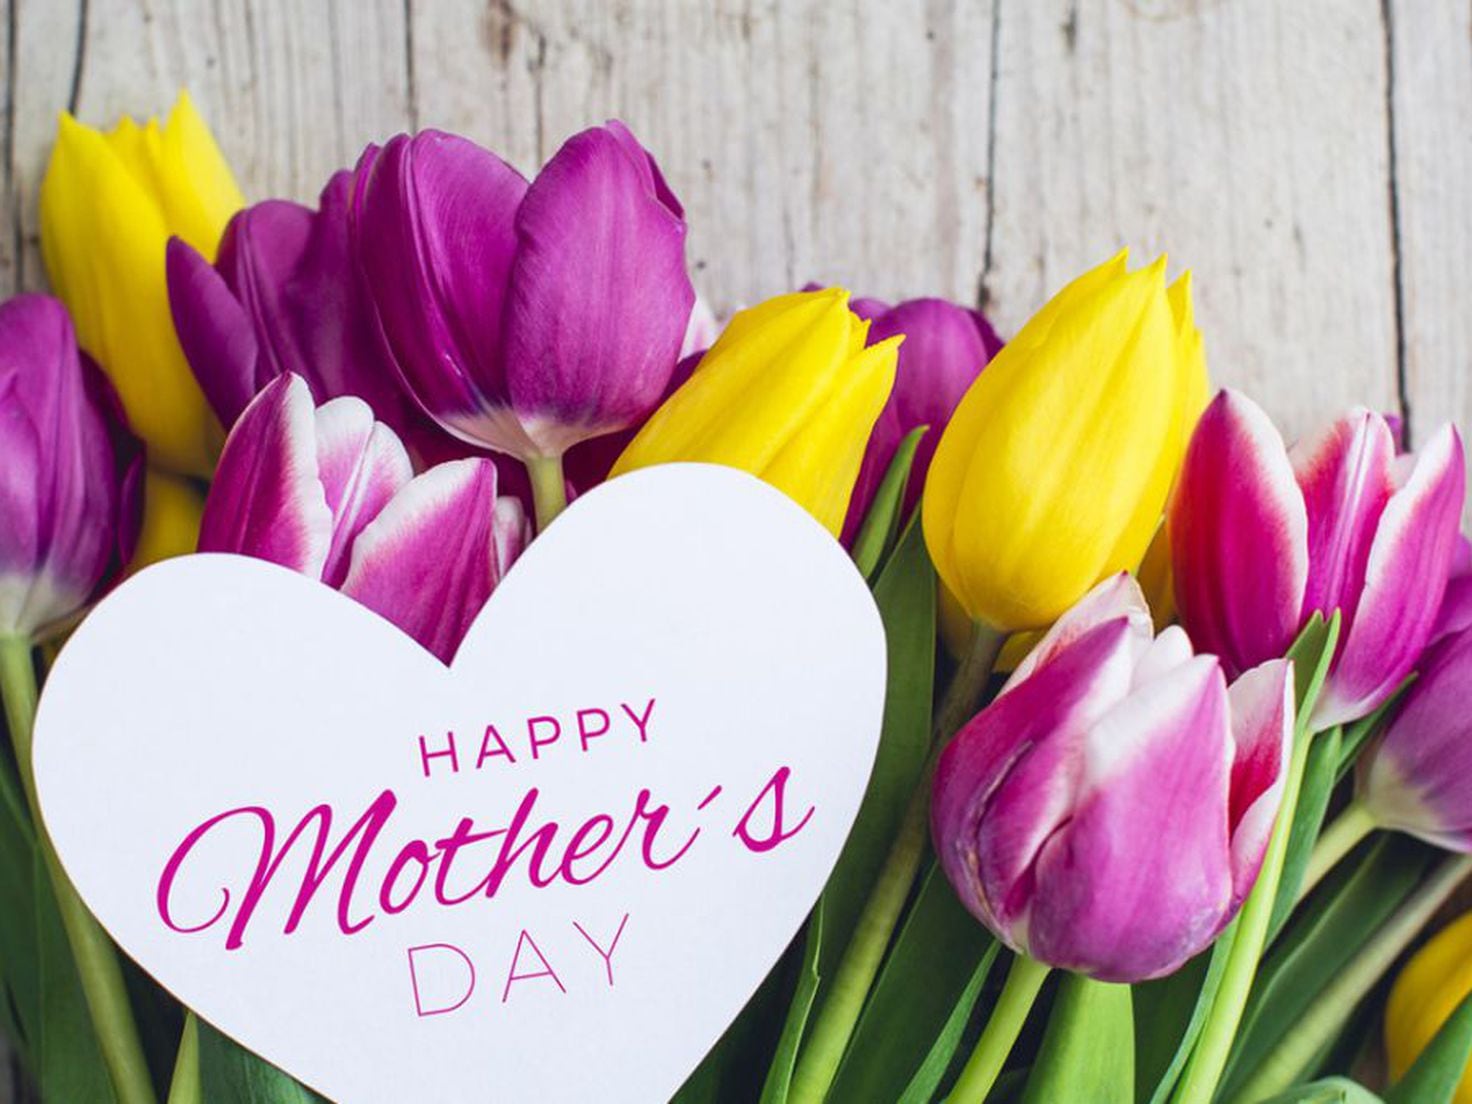 Affordable, thoughtful and lovely things to do for your mom on Mother's Day